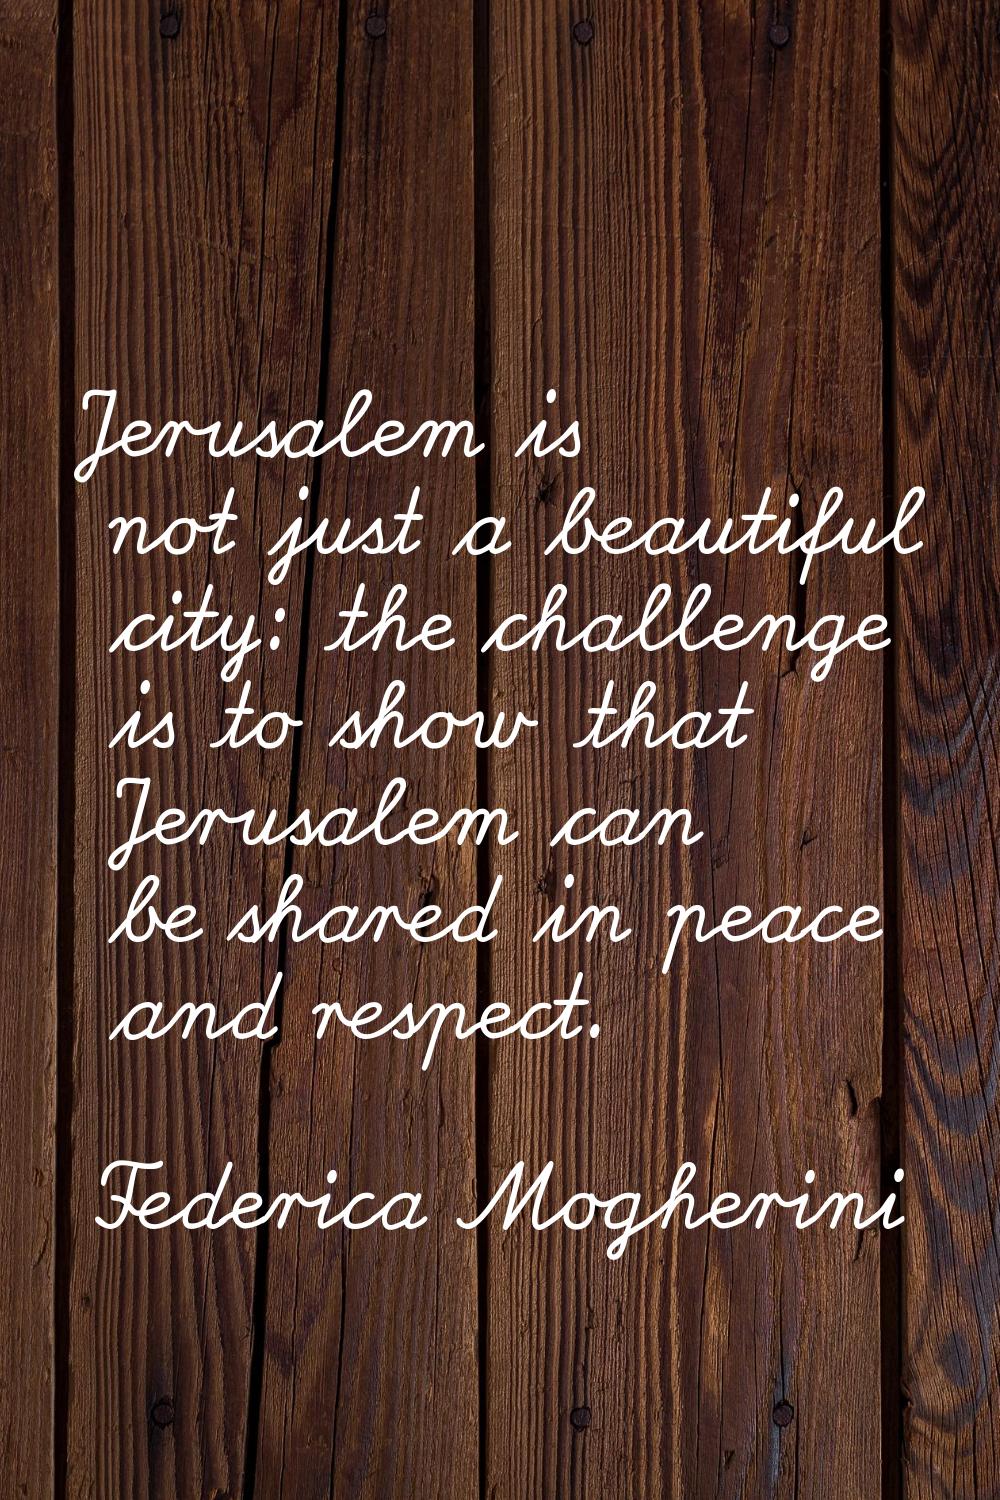 Jerusalem is not just a beautiful city: the challenge is to show that Jerusalem can be shared in pe